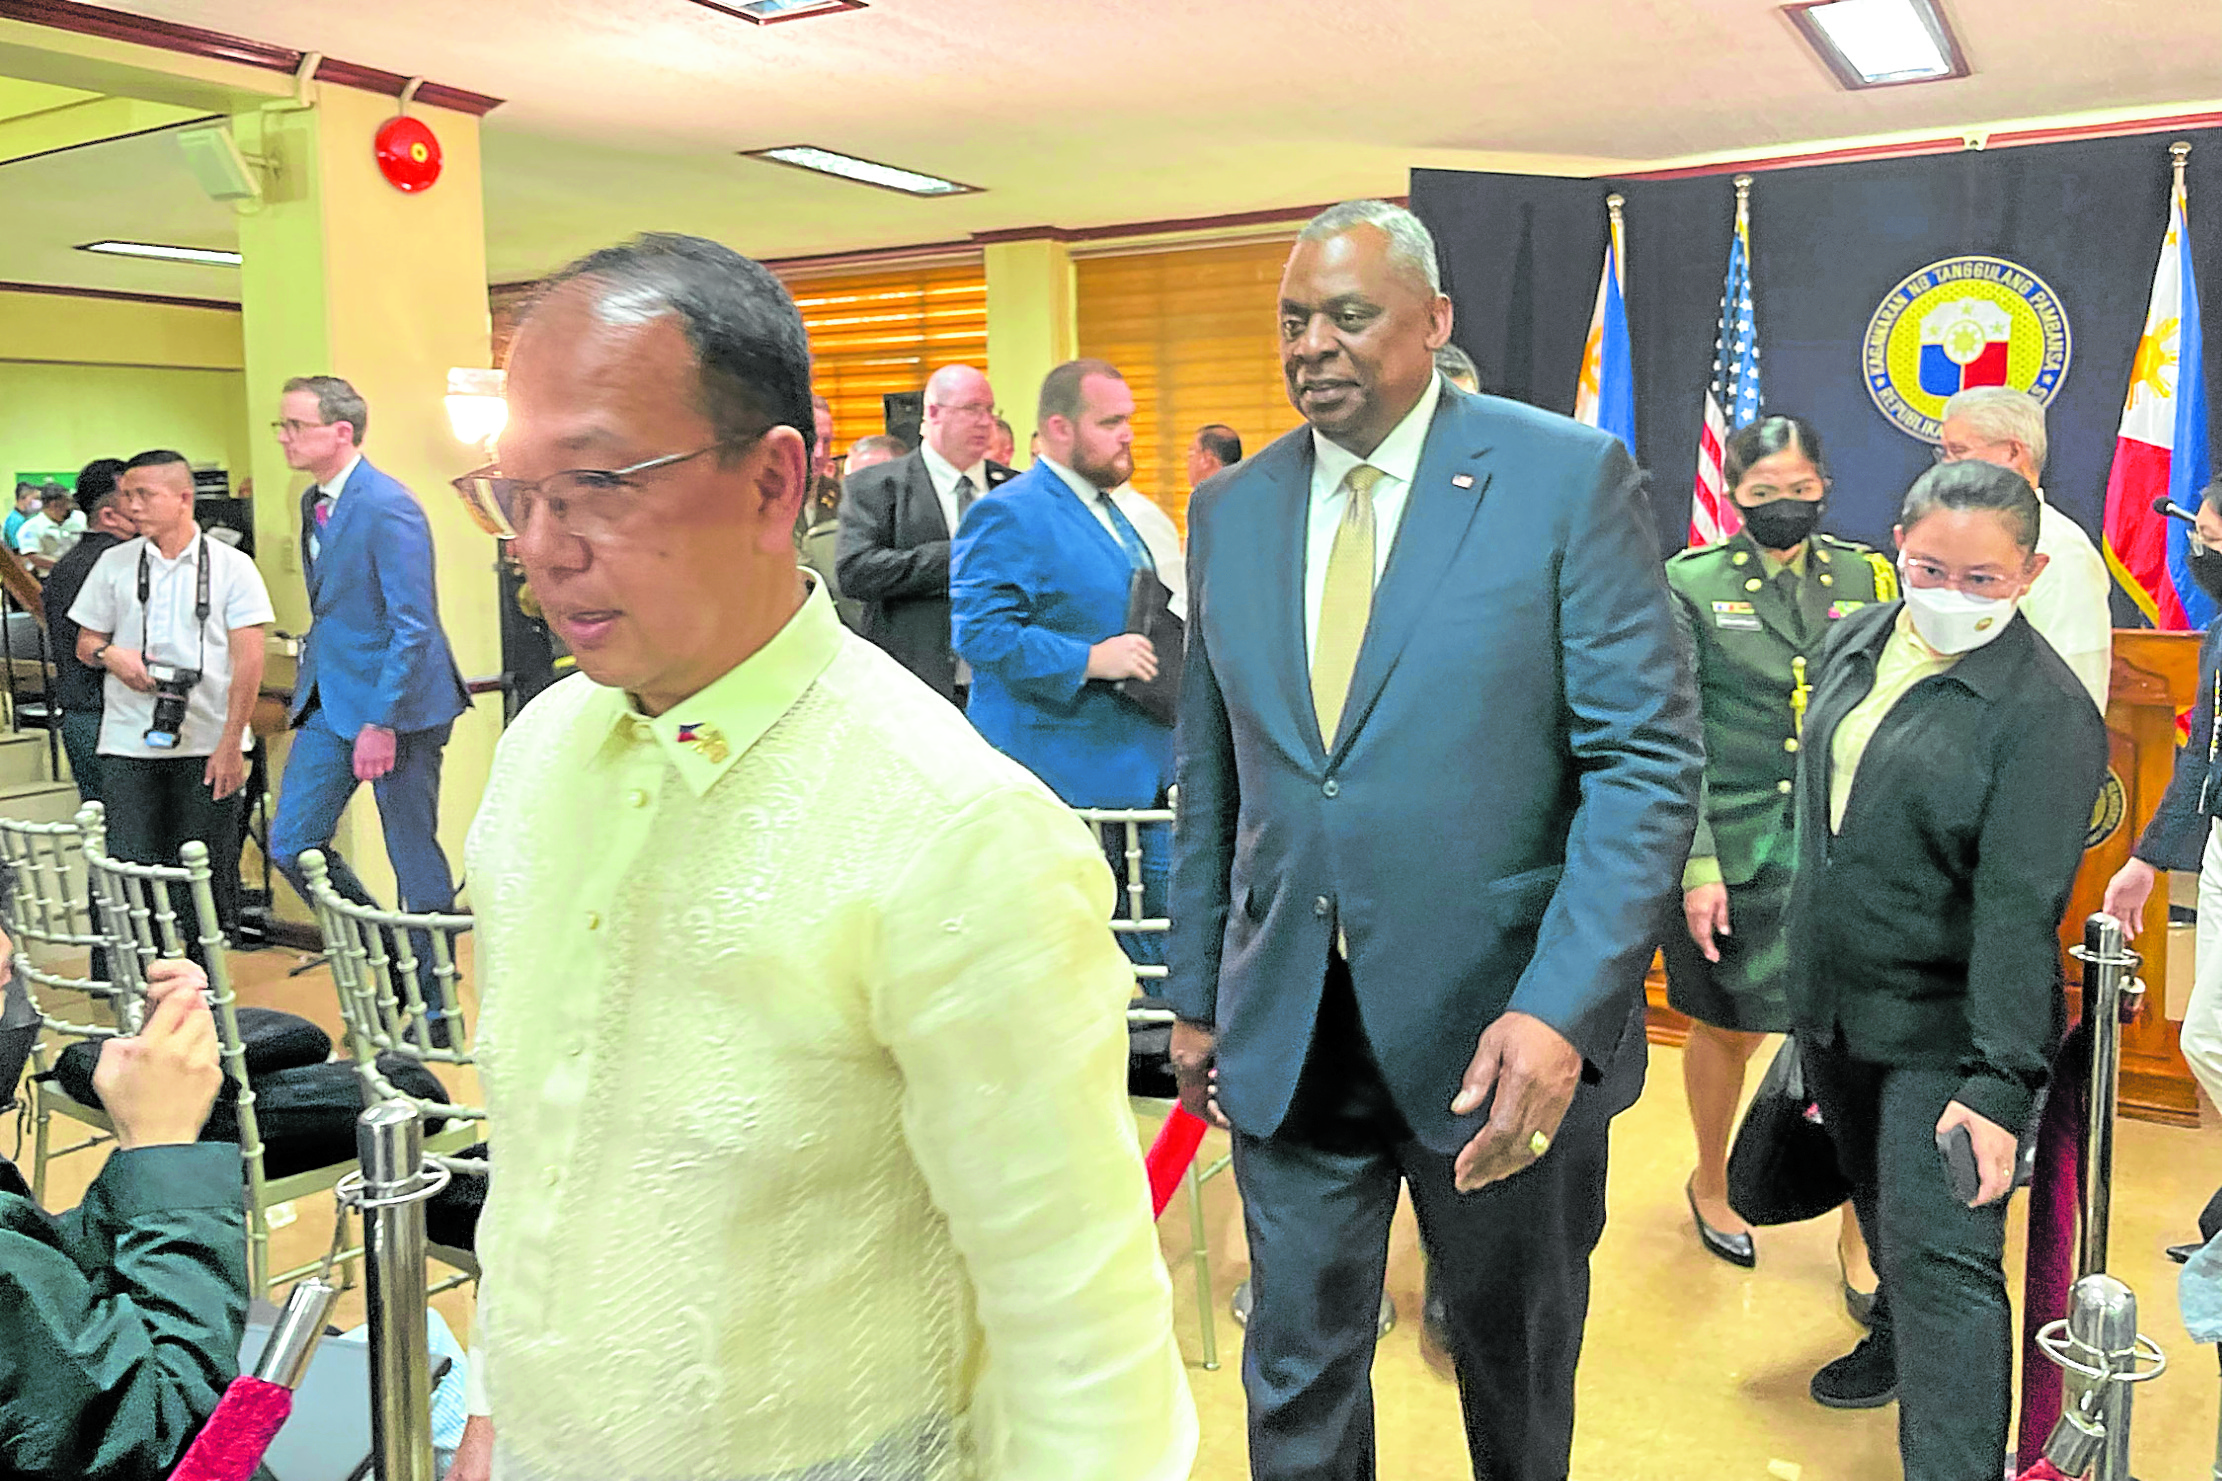 Lloyd Austin III, shown here as he walks behind DefenseSecretary Carlito Galvez Jr. following a joint press conference at Camp Aguinaldo on Thursday